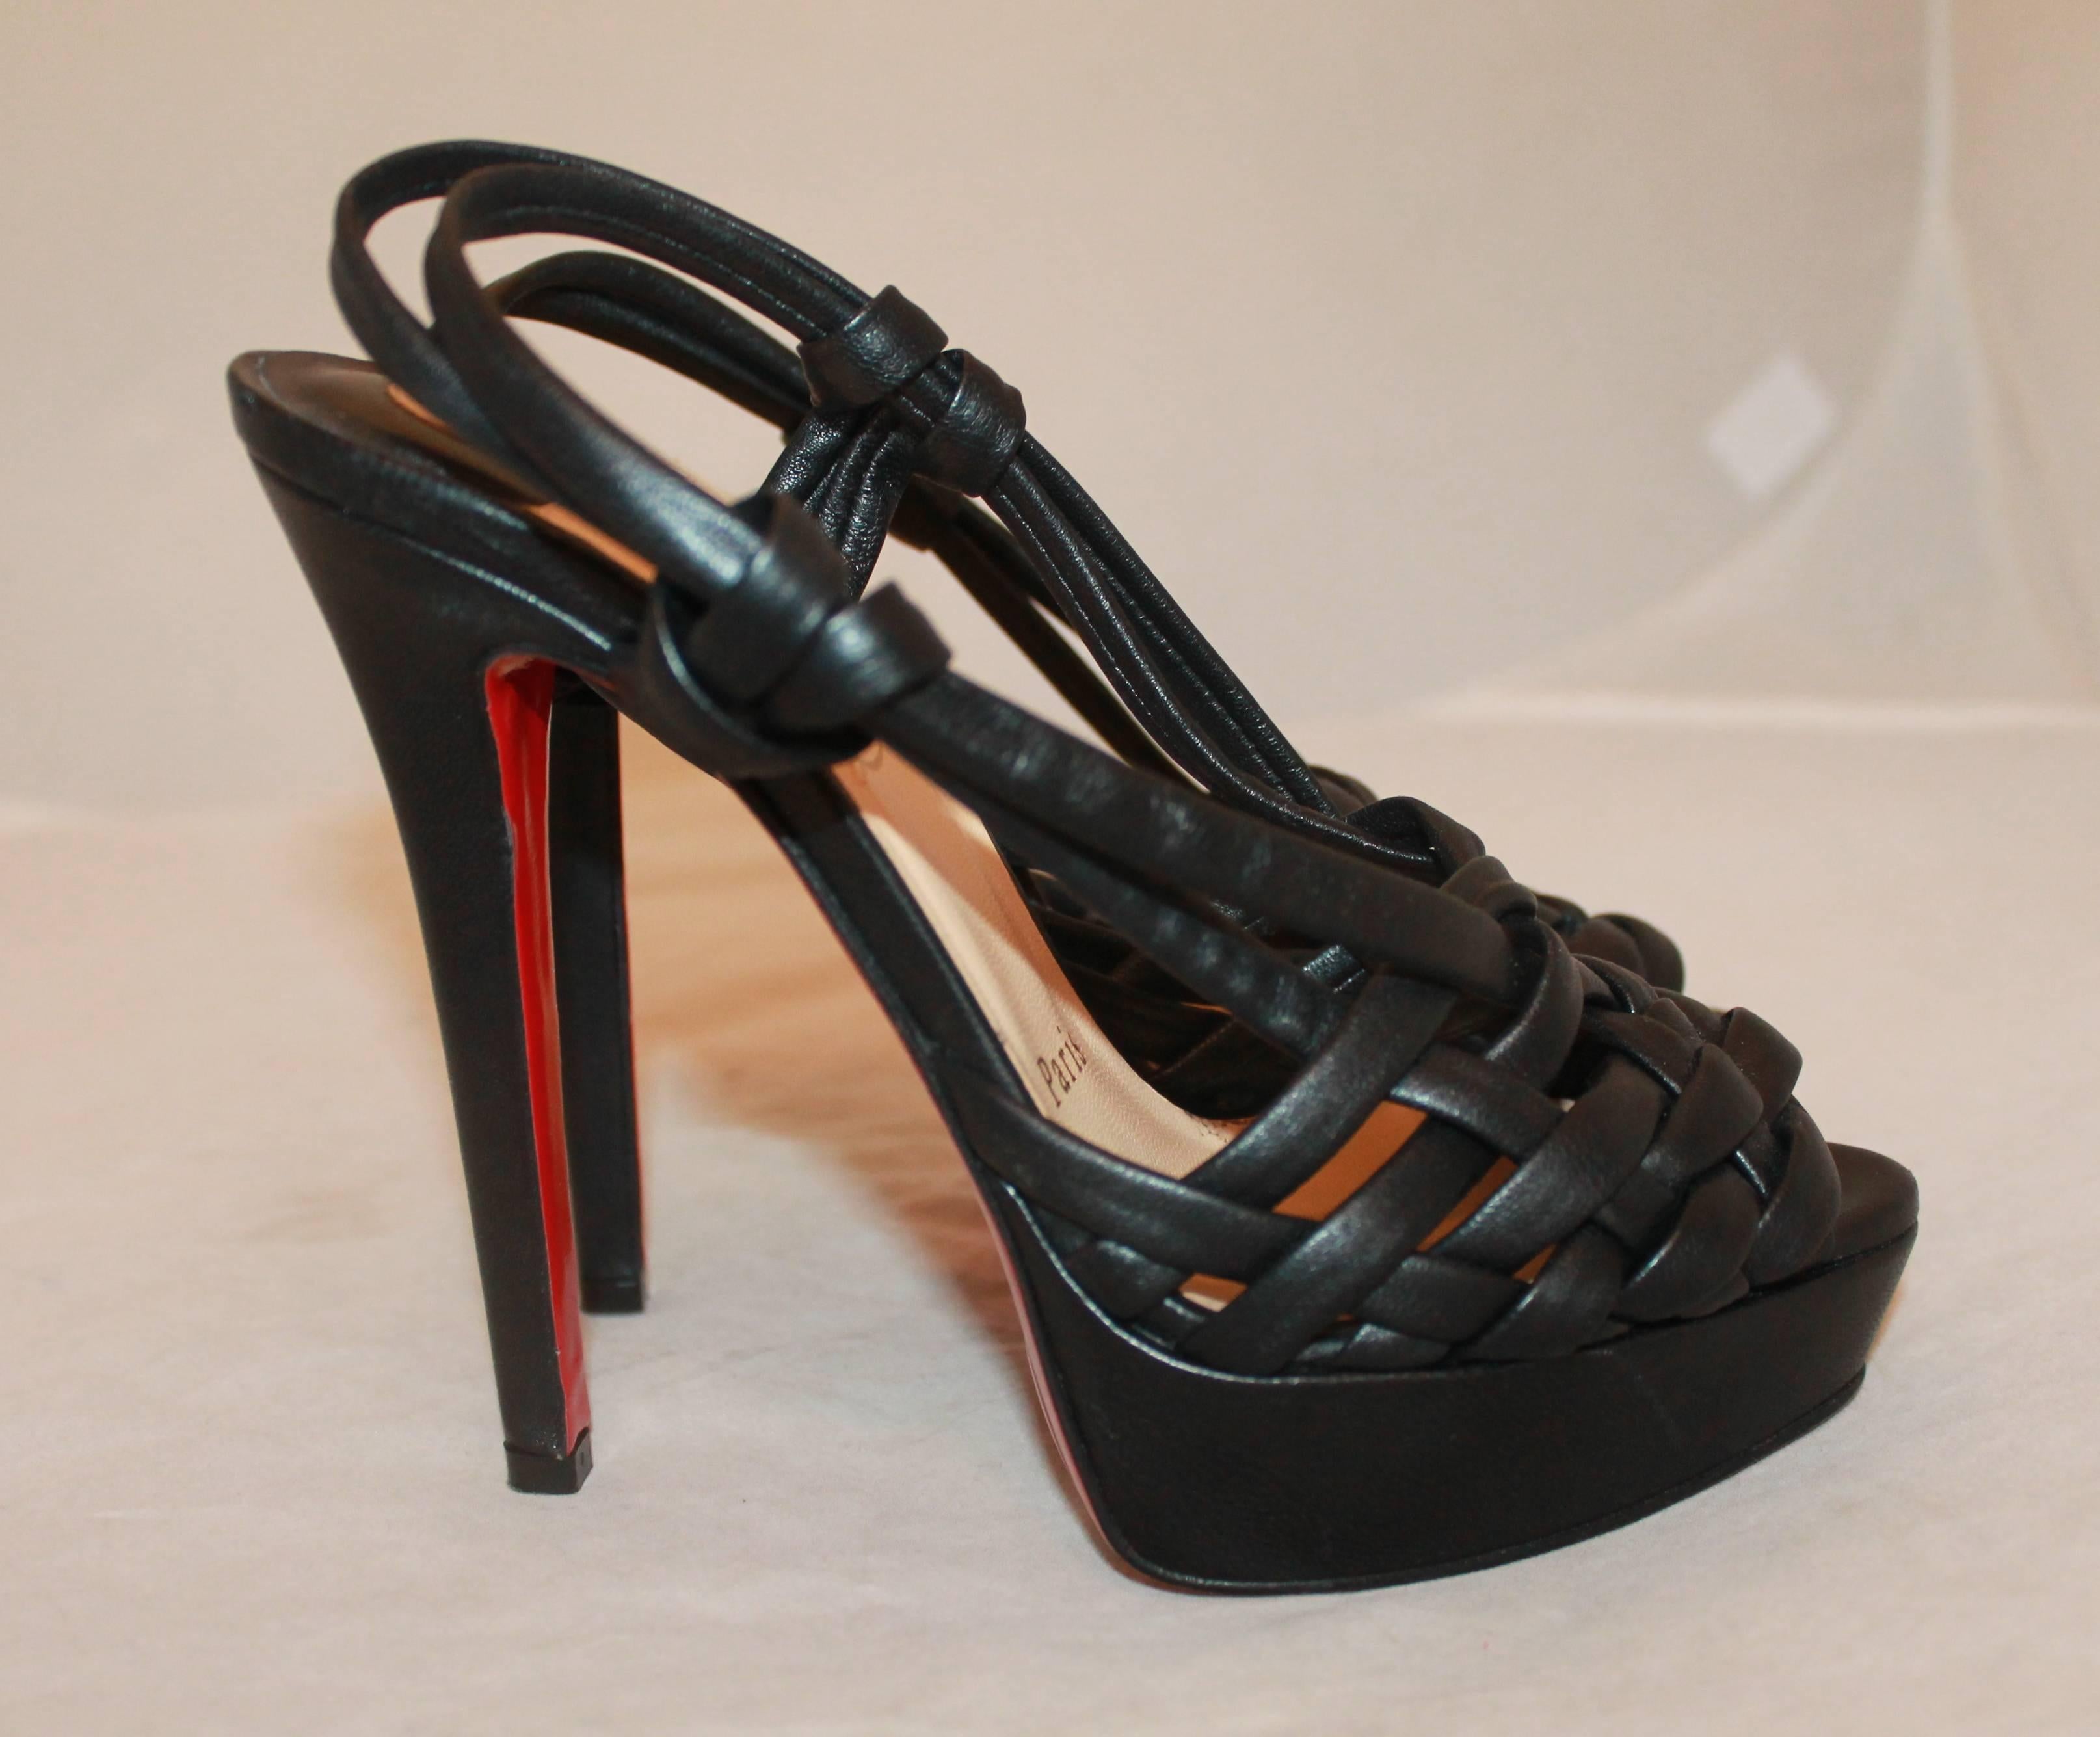 Christian Louboutin Black Strappy Leather Platform Heels - 36. These shoes are in excellent condition and have never been worn. The front section has a woven design to it by the toe. 

Platform Height- 1